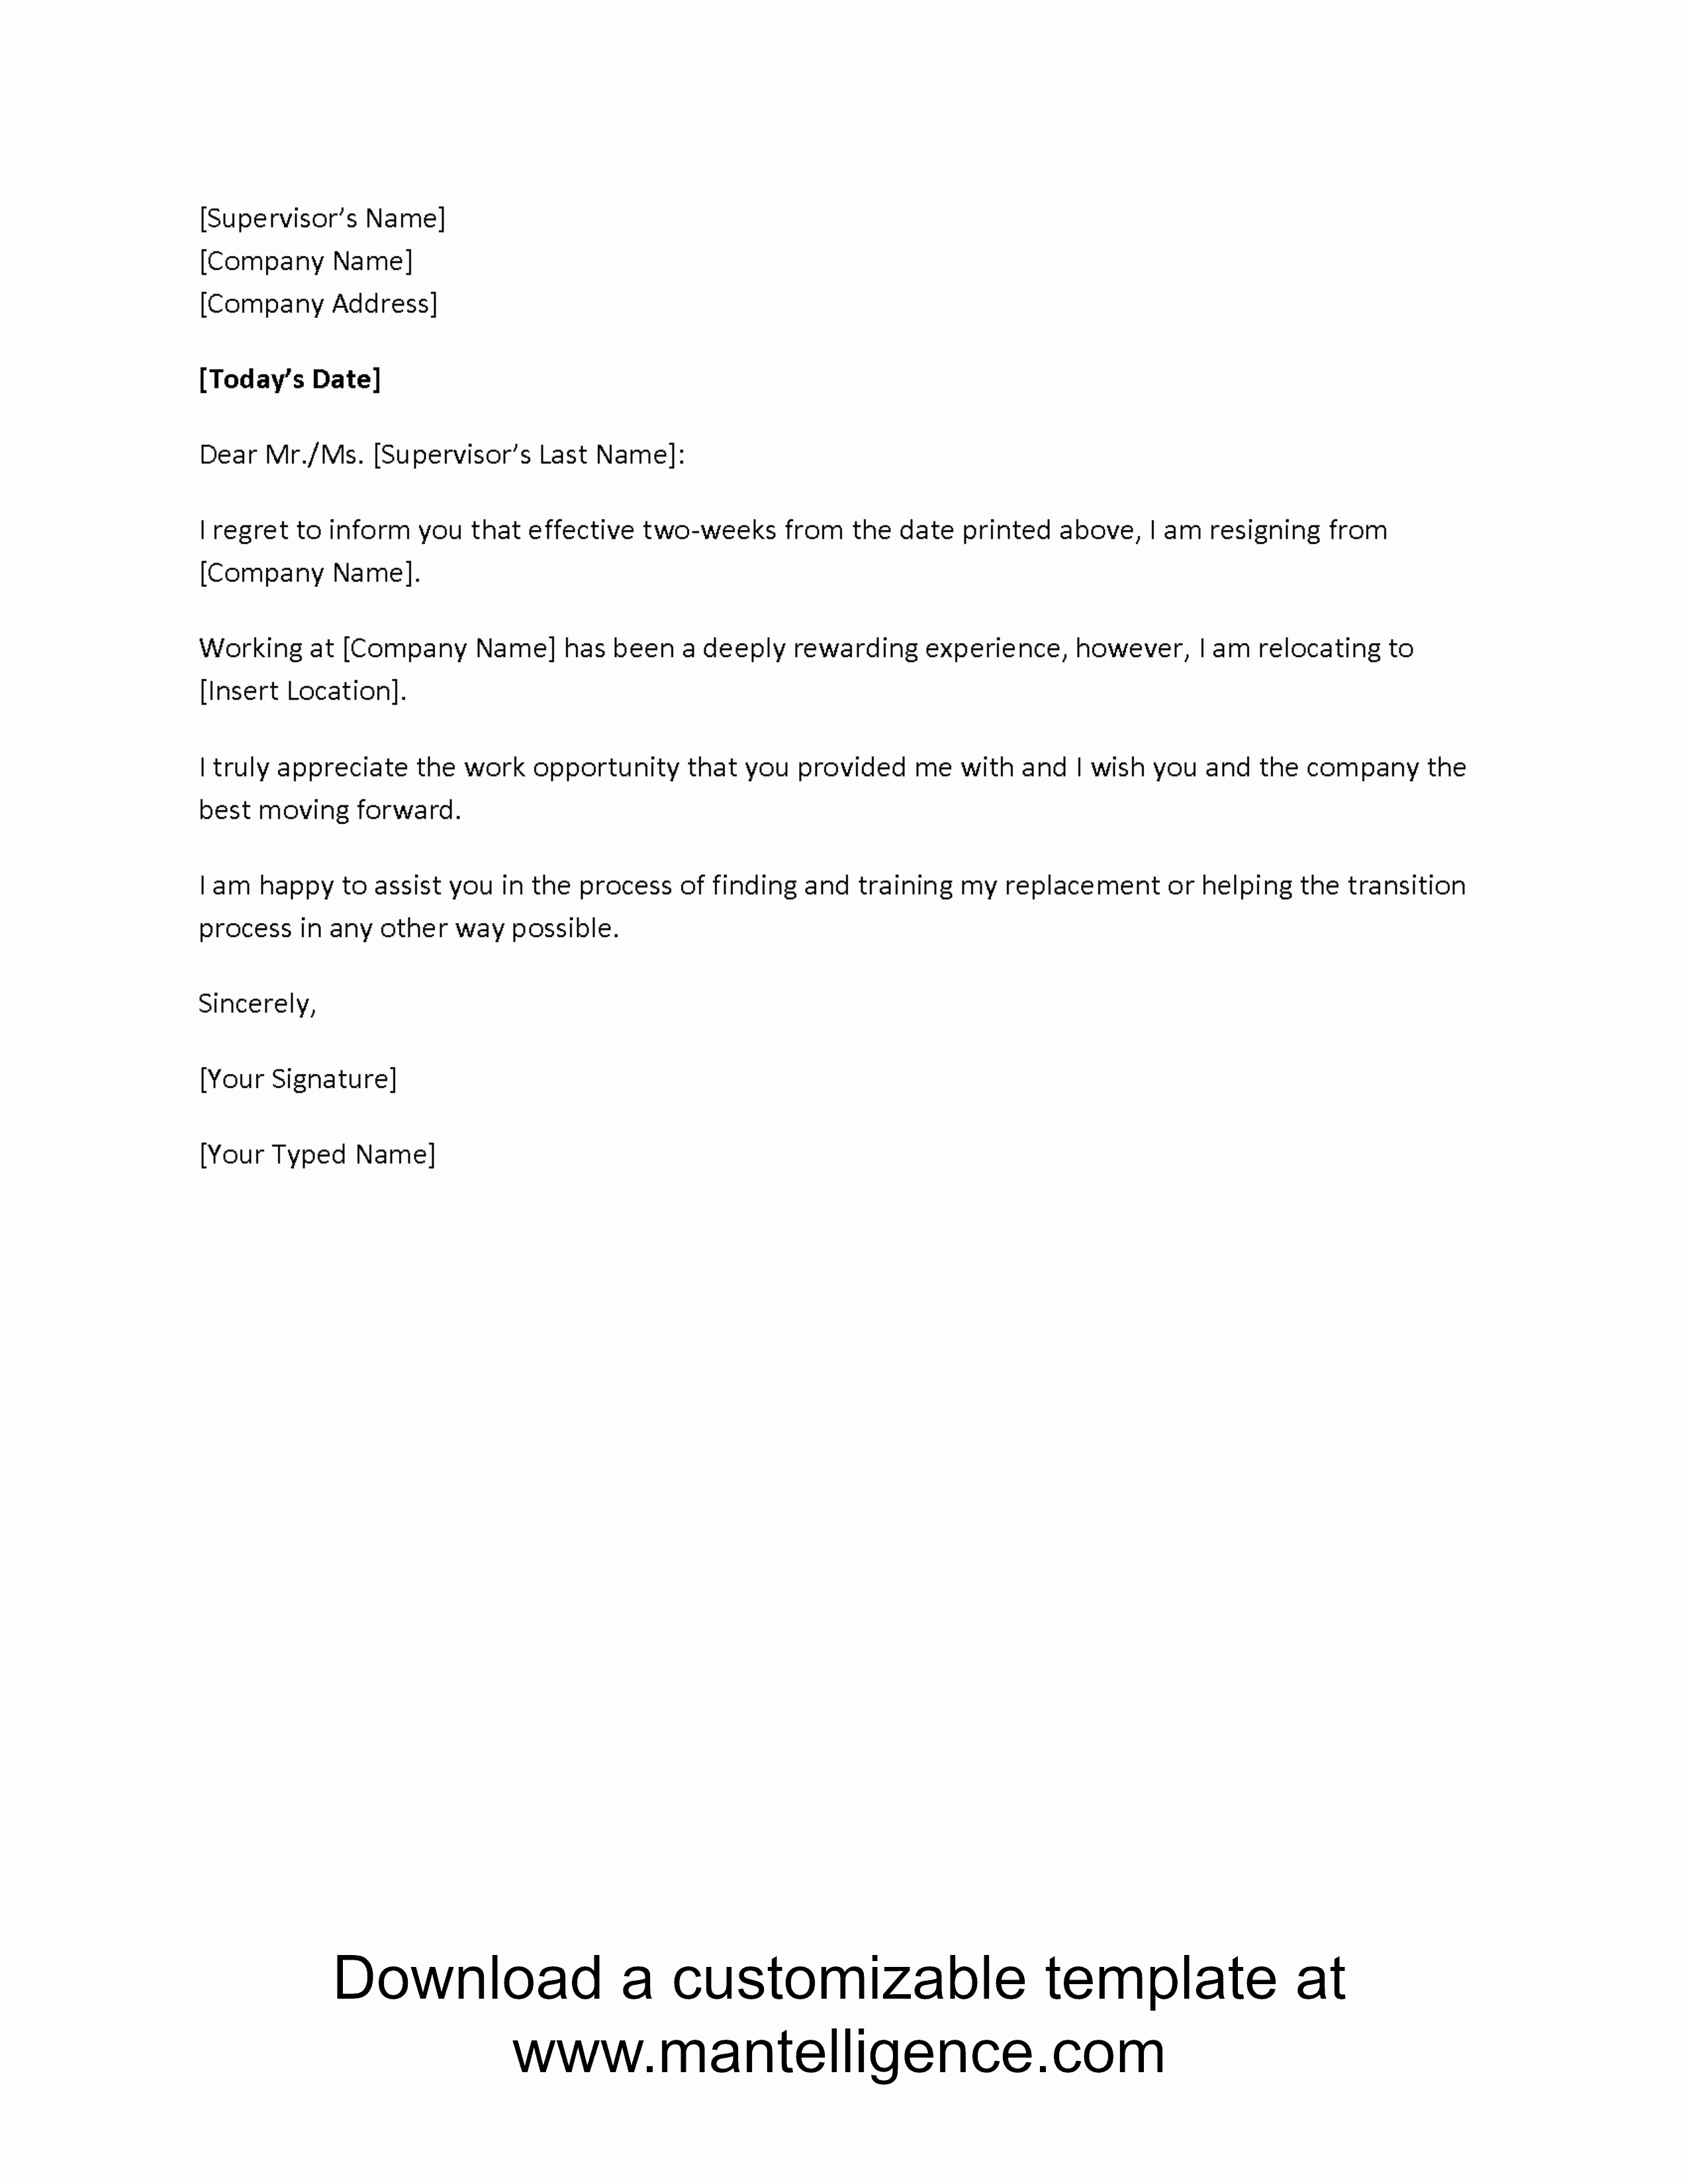 Resignation Letter 2 Week Notice Elegant 3 Highly Professional Two Weeks Notice Letter Templates